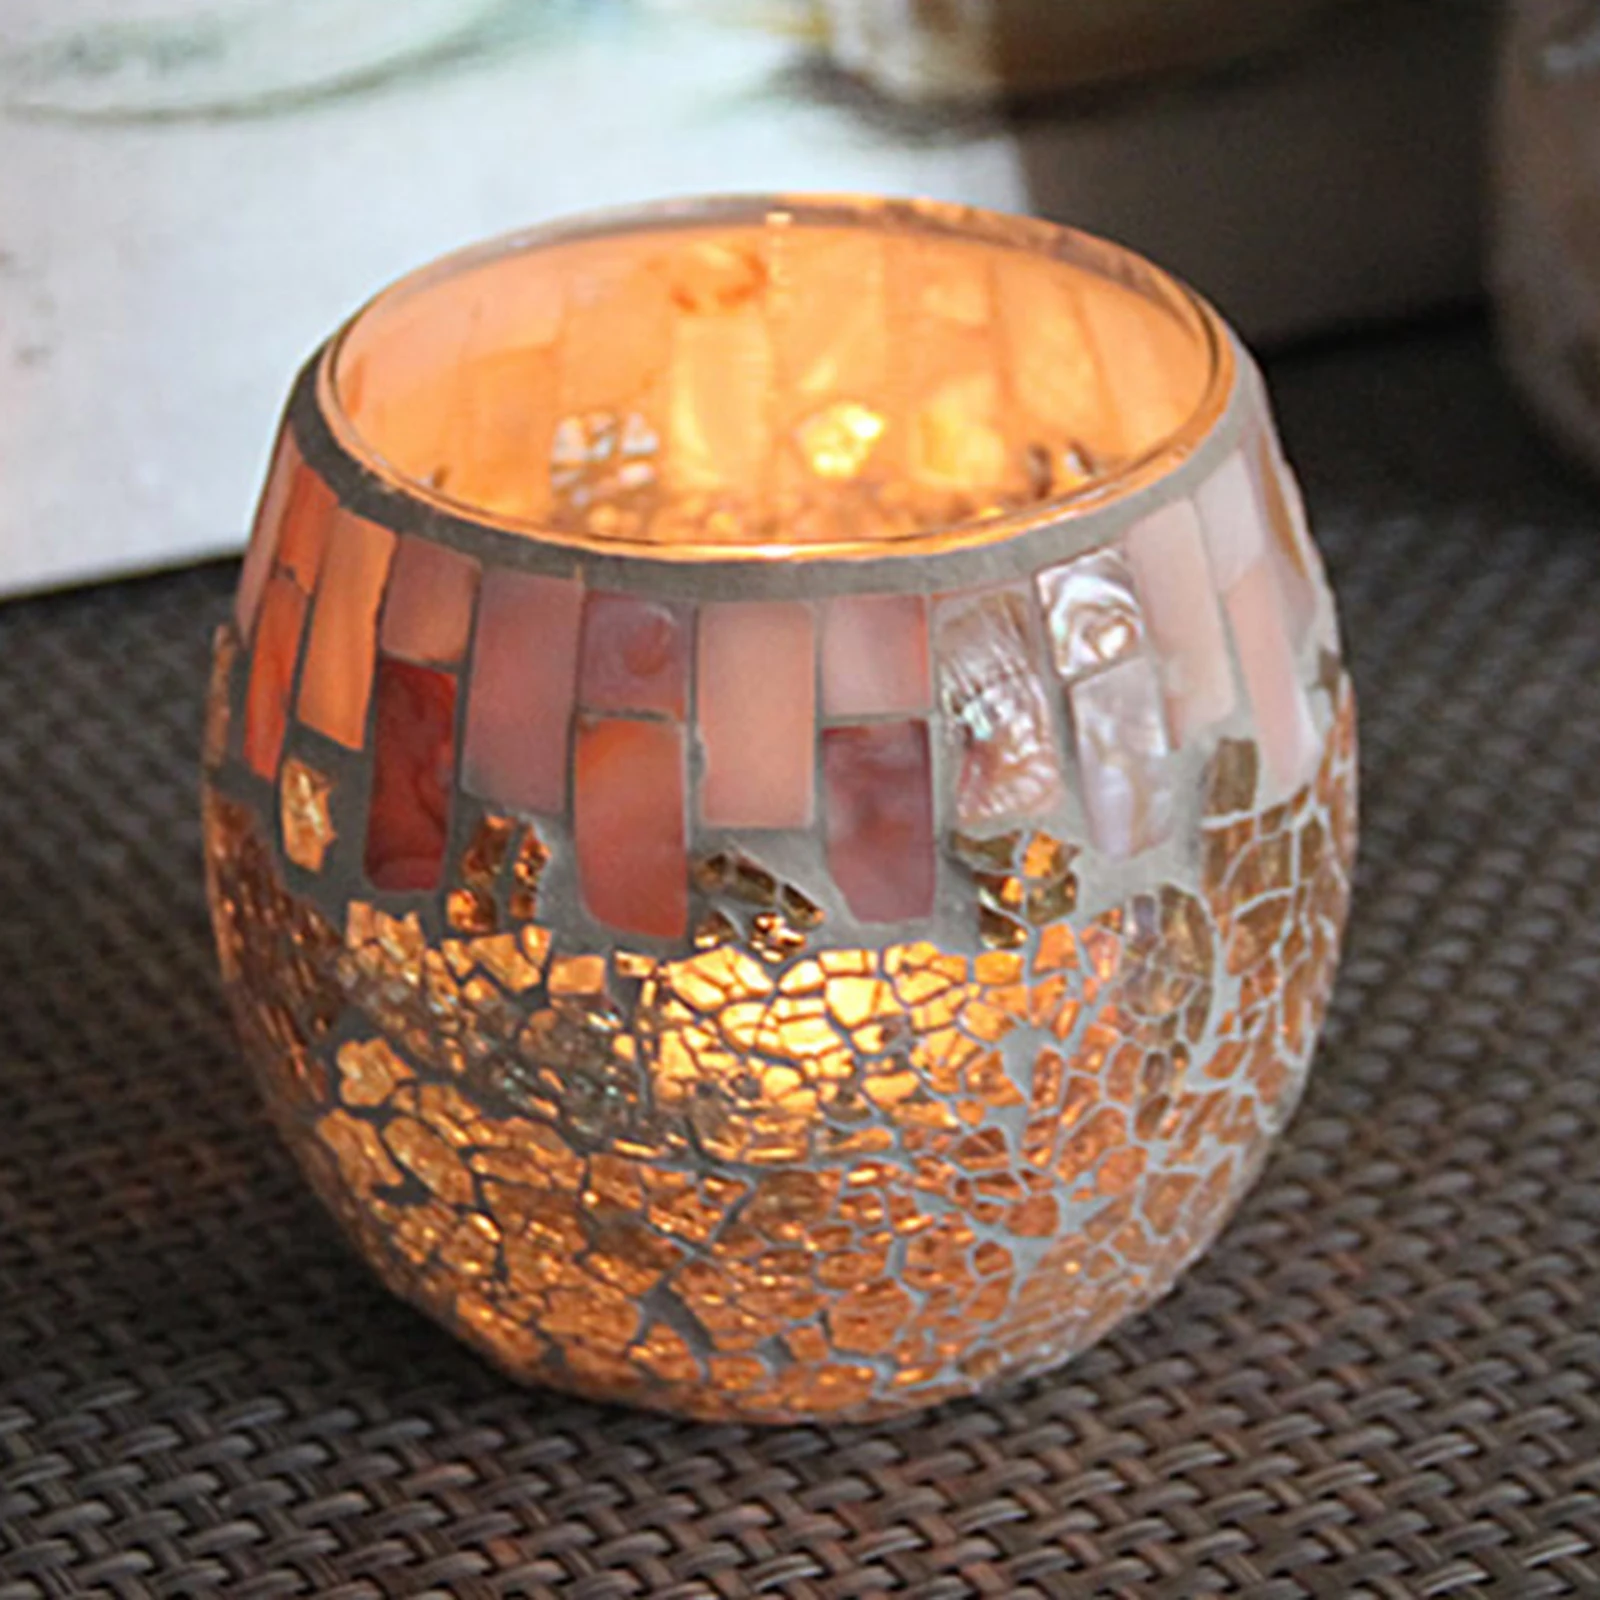 Mosaic Glass Candle Holders, Tea Light Holders Handmade Artwork Gifts for Home Decor Party Decorations